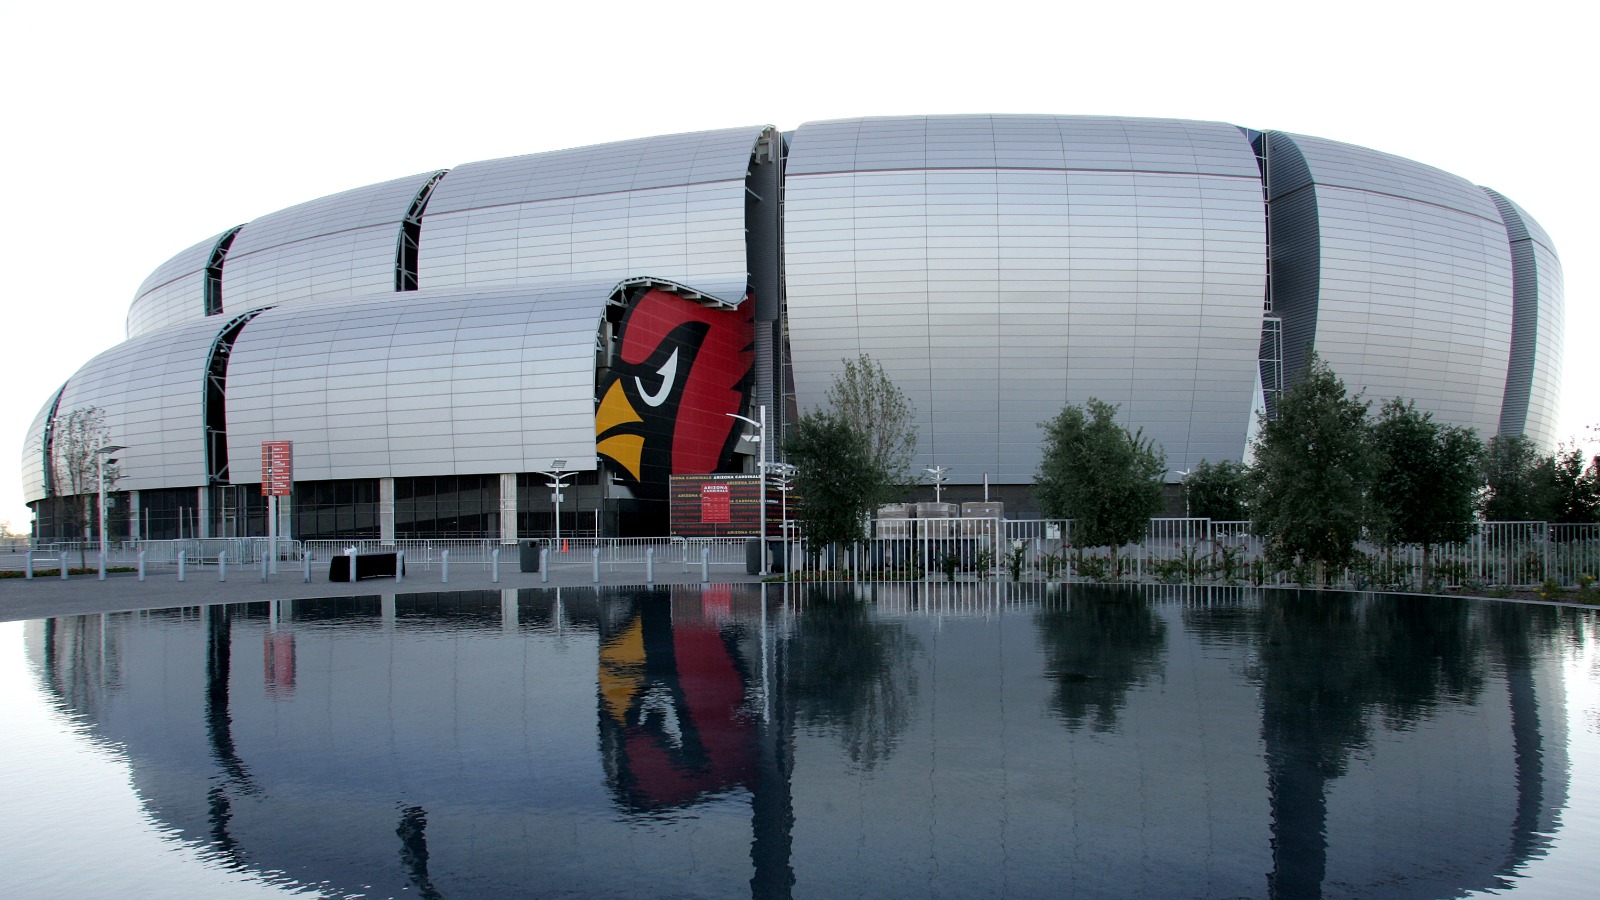 Arizona Cardinals game to jam freeways Thursday evening for commuters